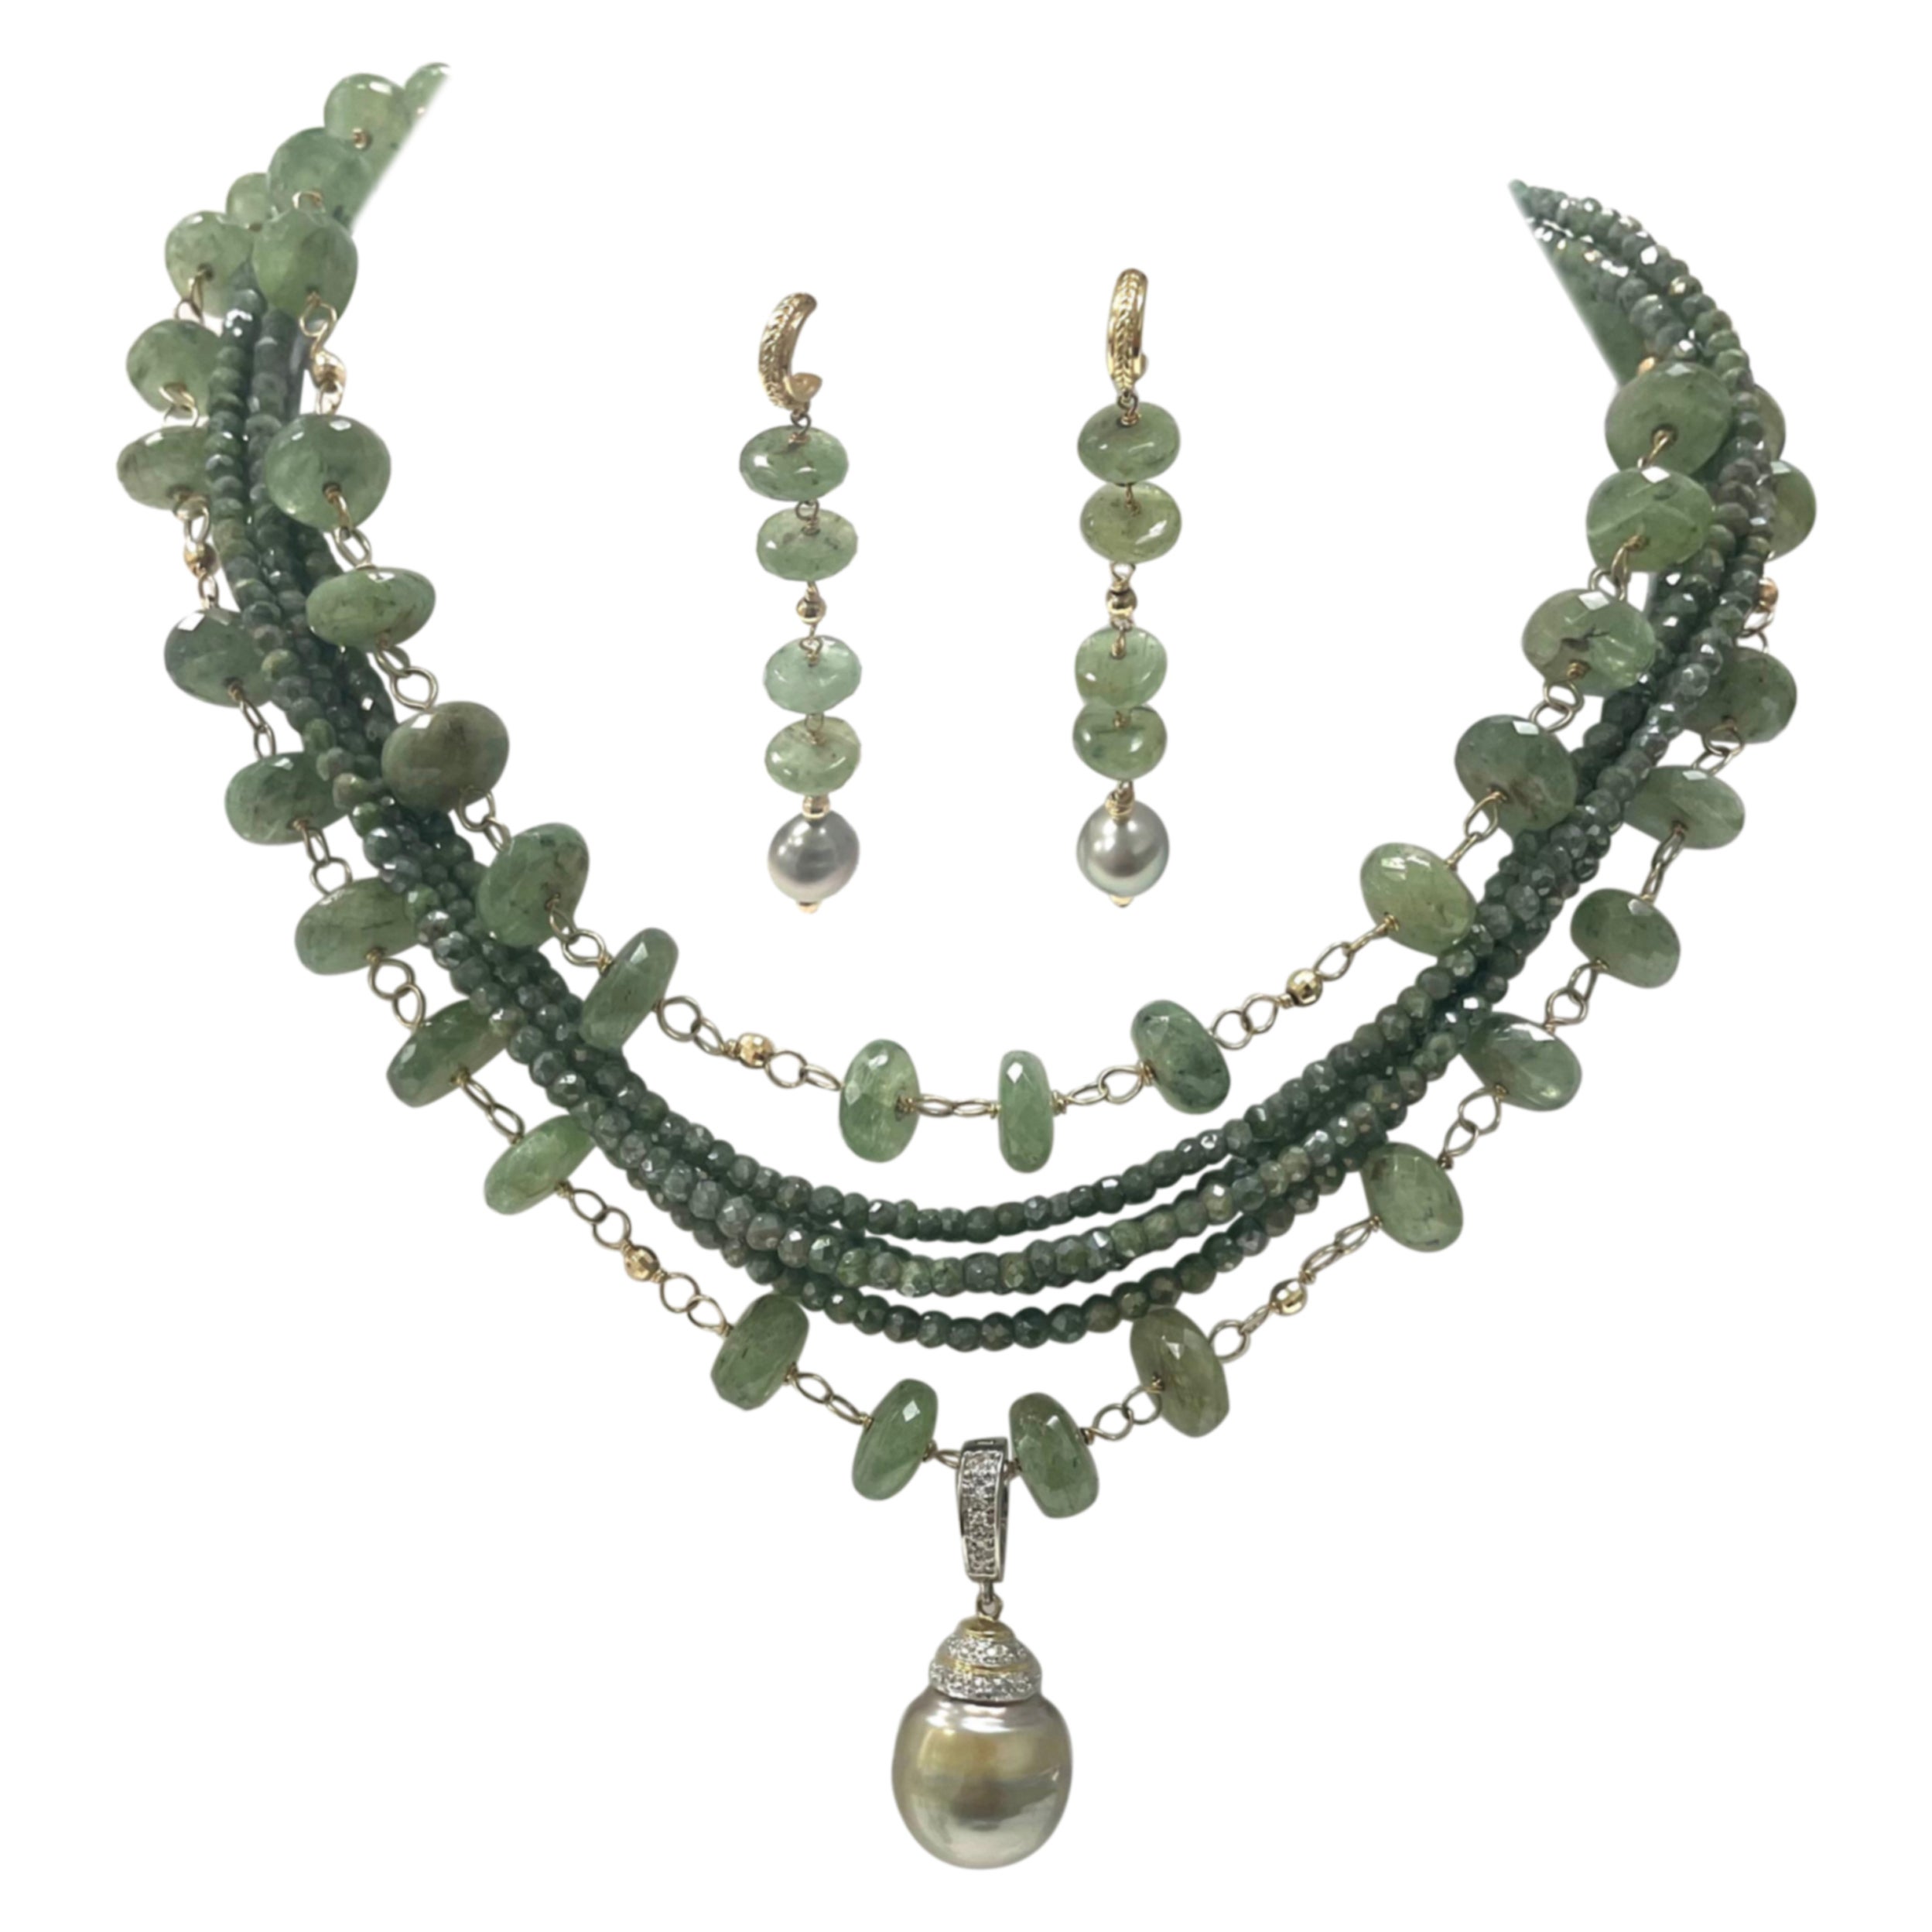 Description
Six strands of beautifully crafted and composed rare Green Kyanite and Moss Sapphire are adorned by a large Pistachio Tahitian Pearl capped with diamonds. The Tahitian pendant is removable and can be worn with other necklaces, however